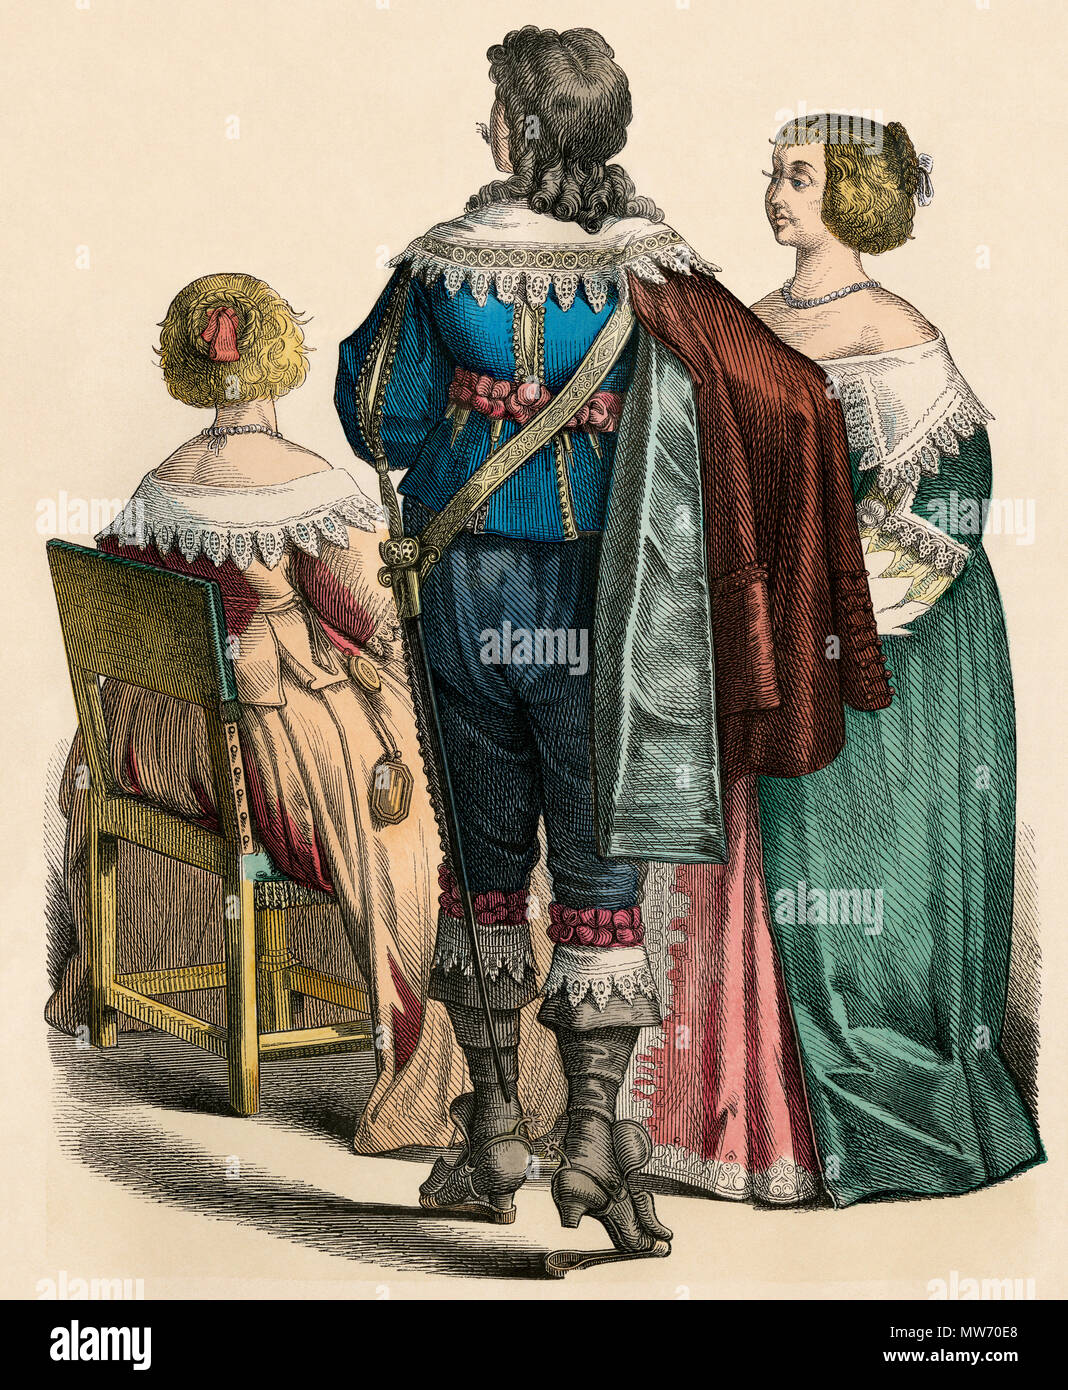 French clothing of the 1600s. Hand-colored print Stock Photo